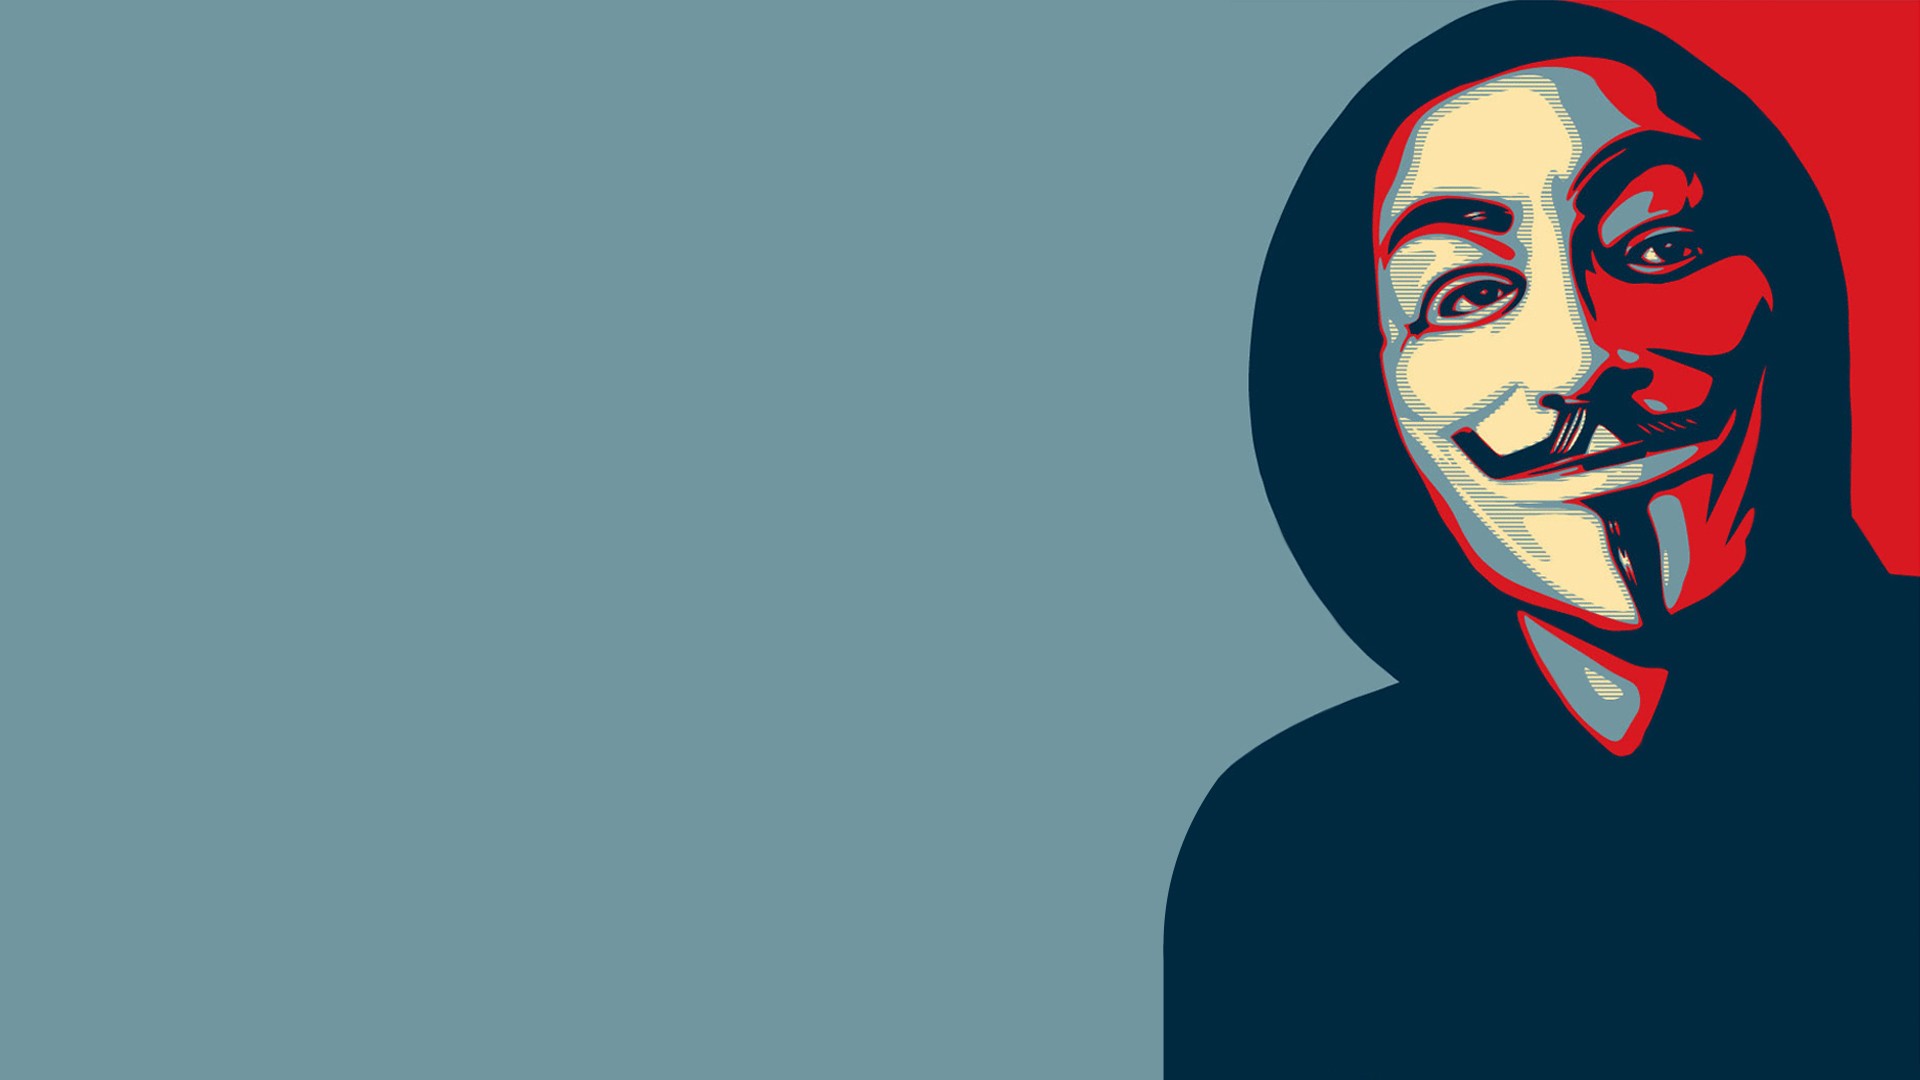 Anonymous Face Mask Minimalism Guy Fawkes Mask Hope Posters 1920x1080